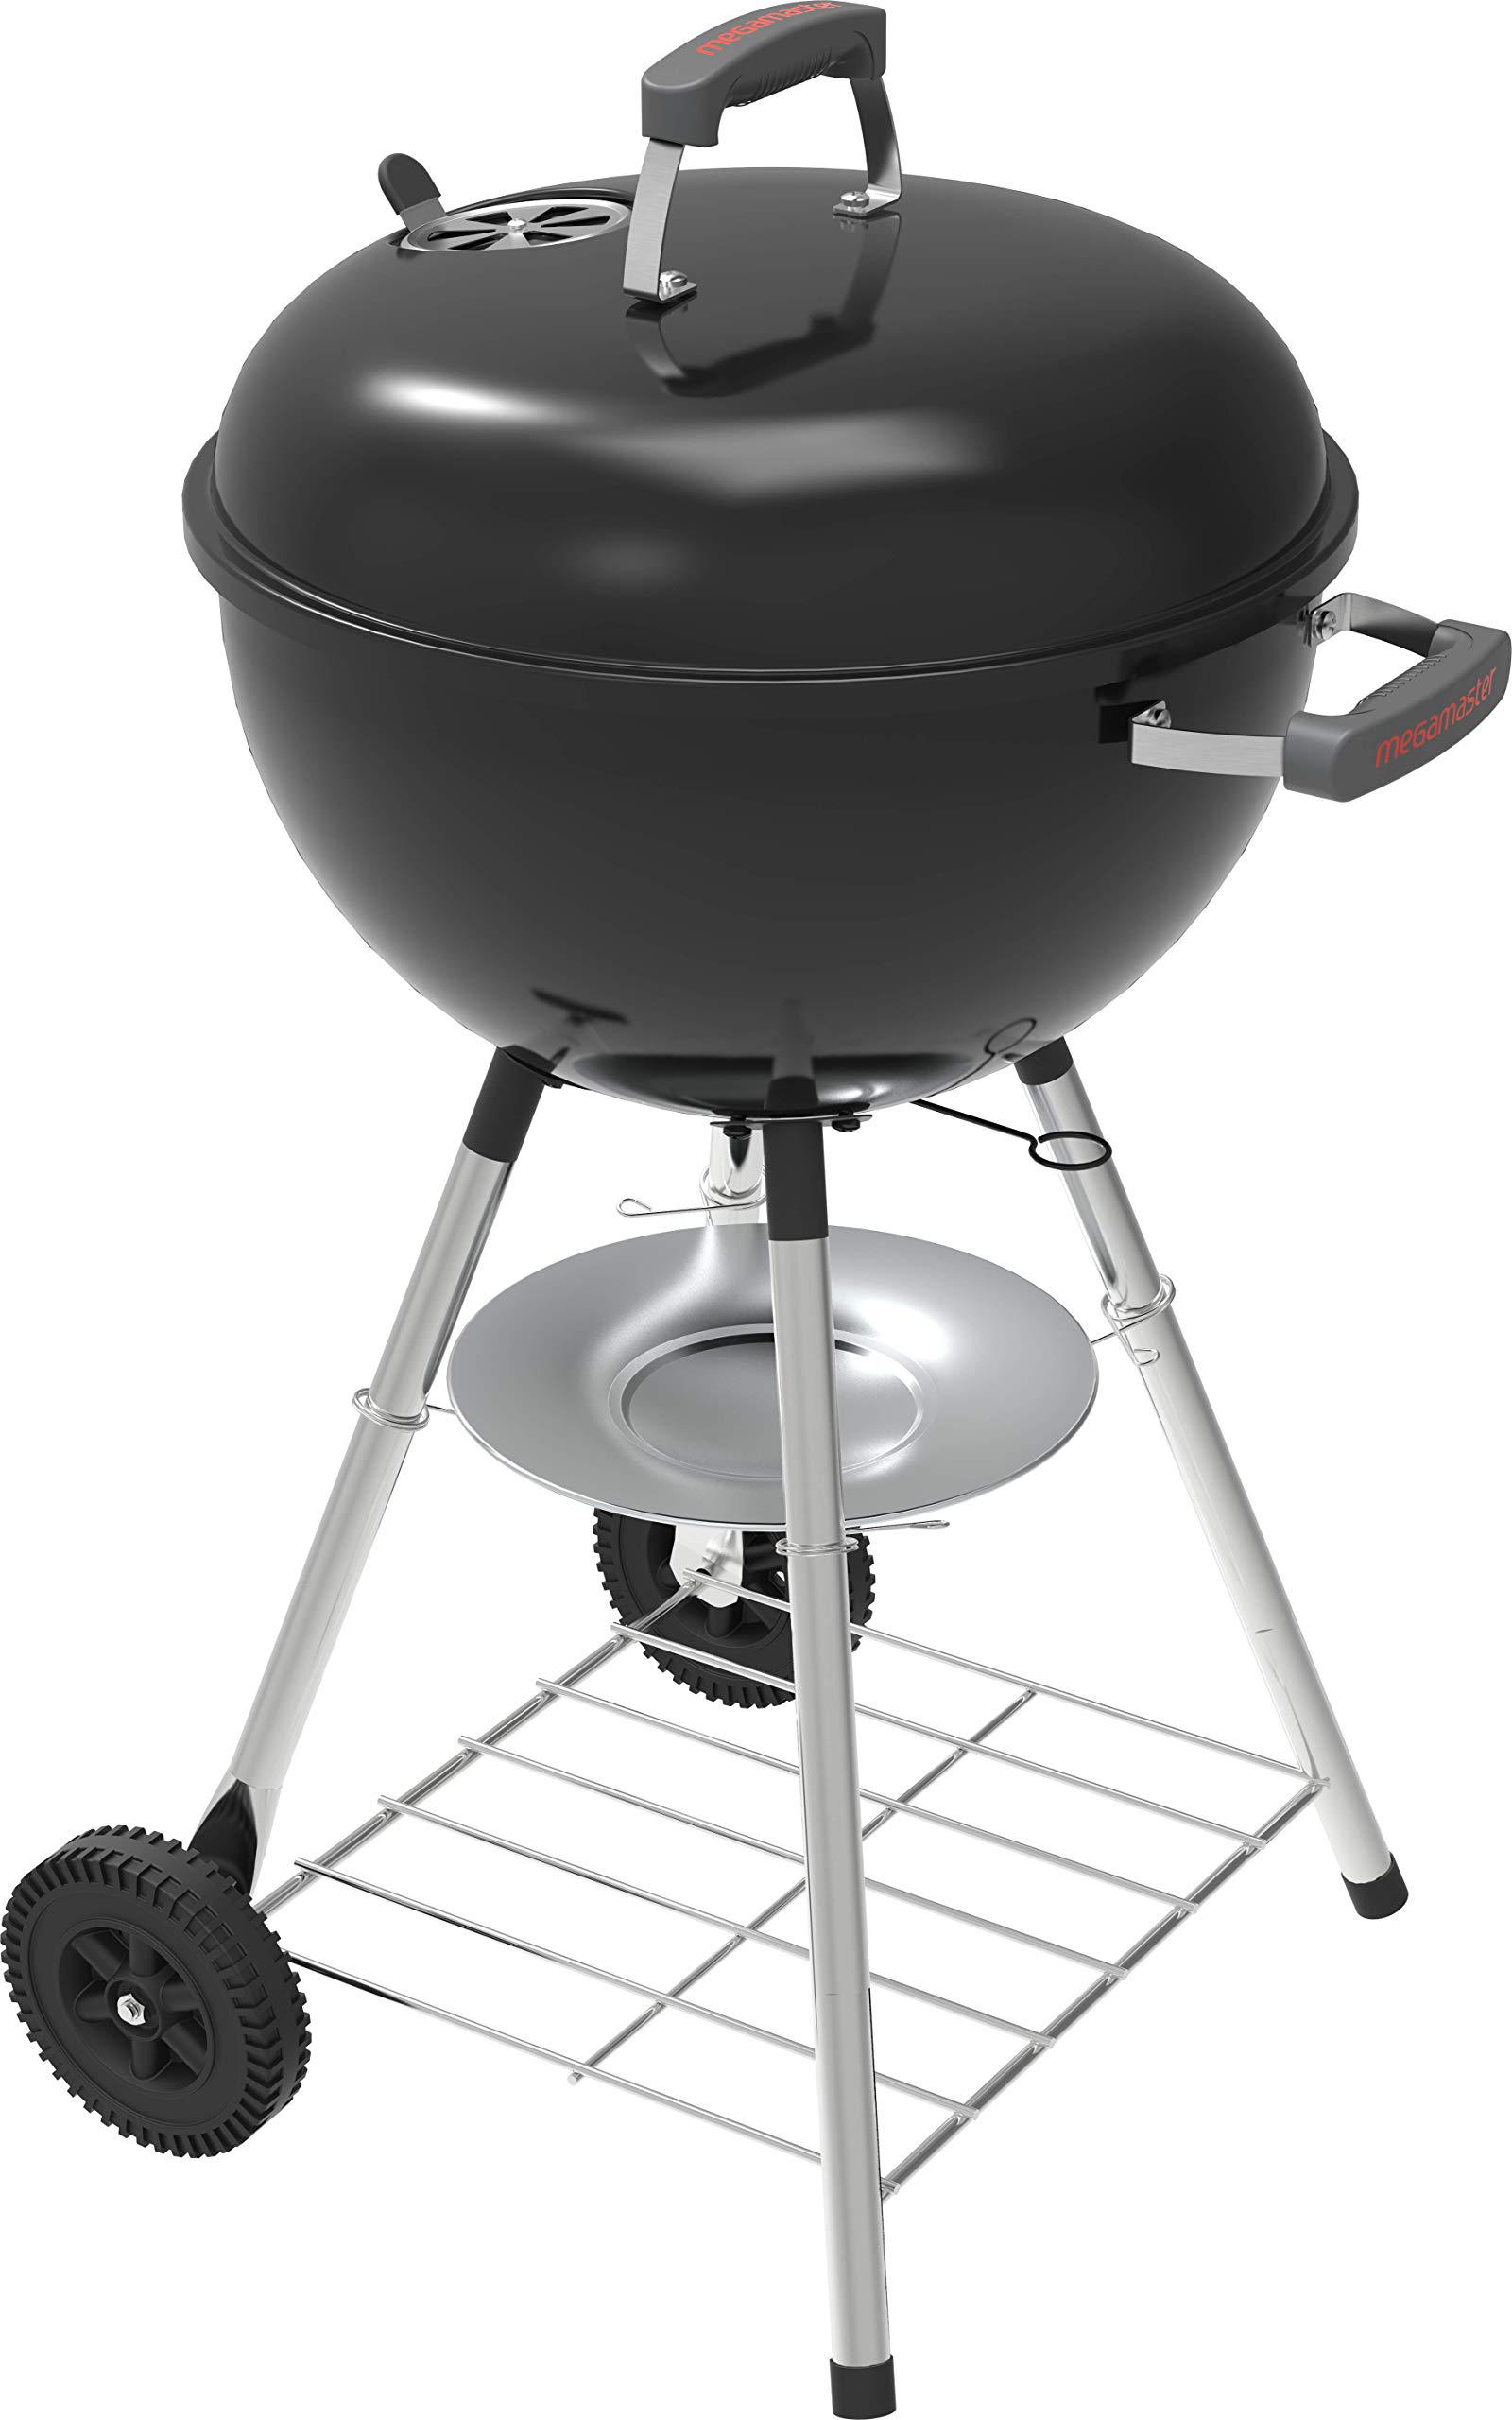 megamaster premium charcoal grill, 18" heavy duty charcoal kettle grill, outdoor cooking, camping patio, backyard, tailgating